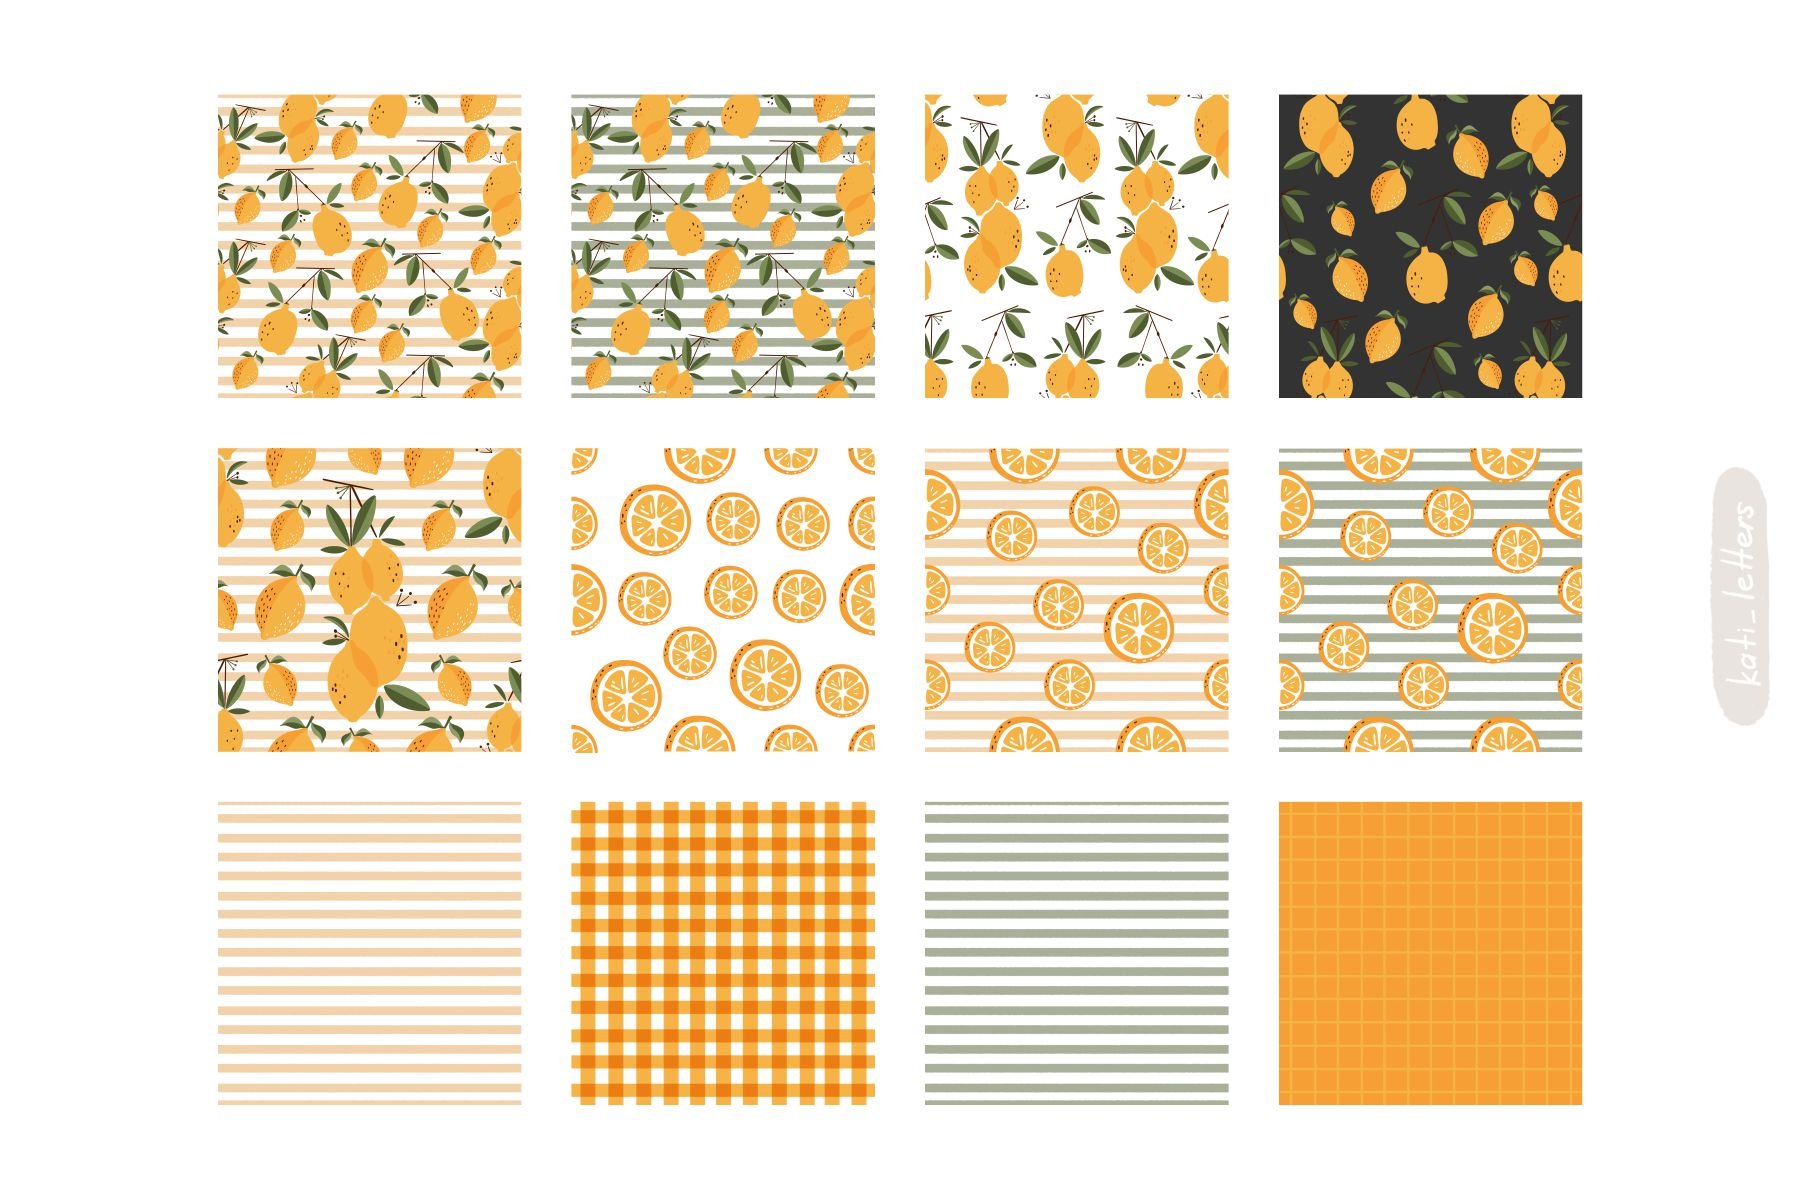 Some options of the lemon patterns.